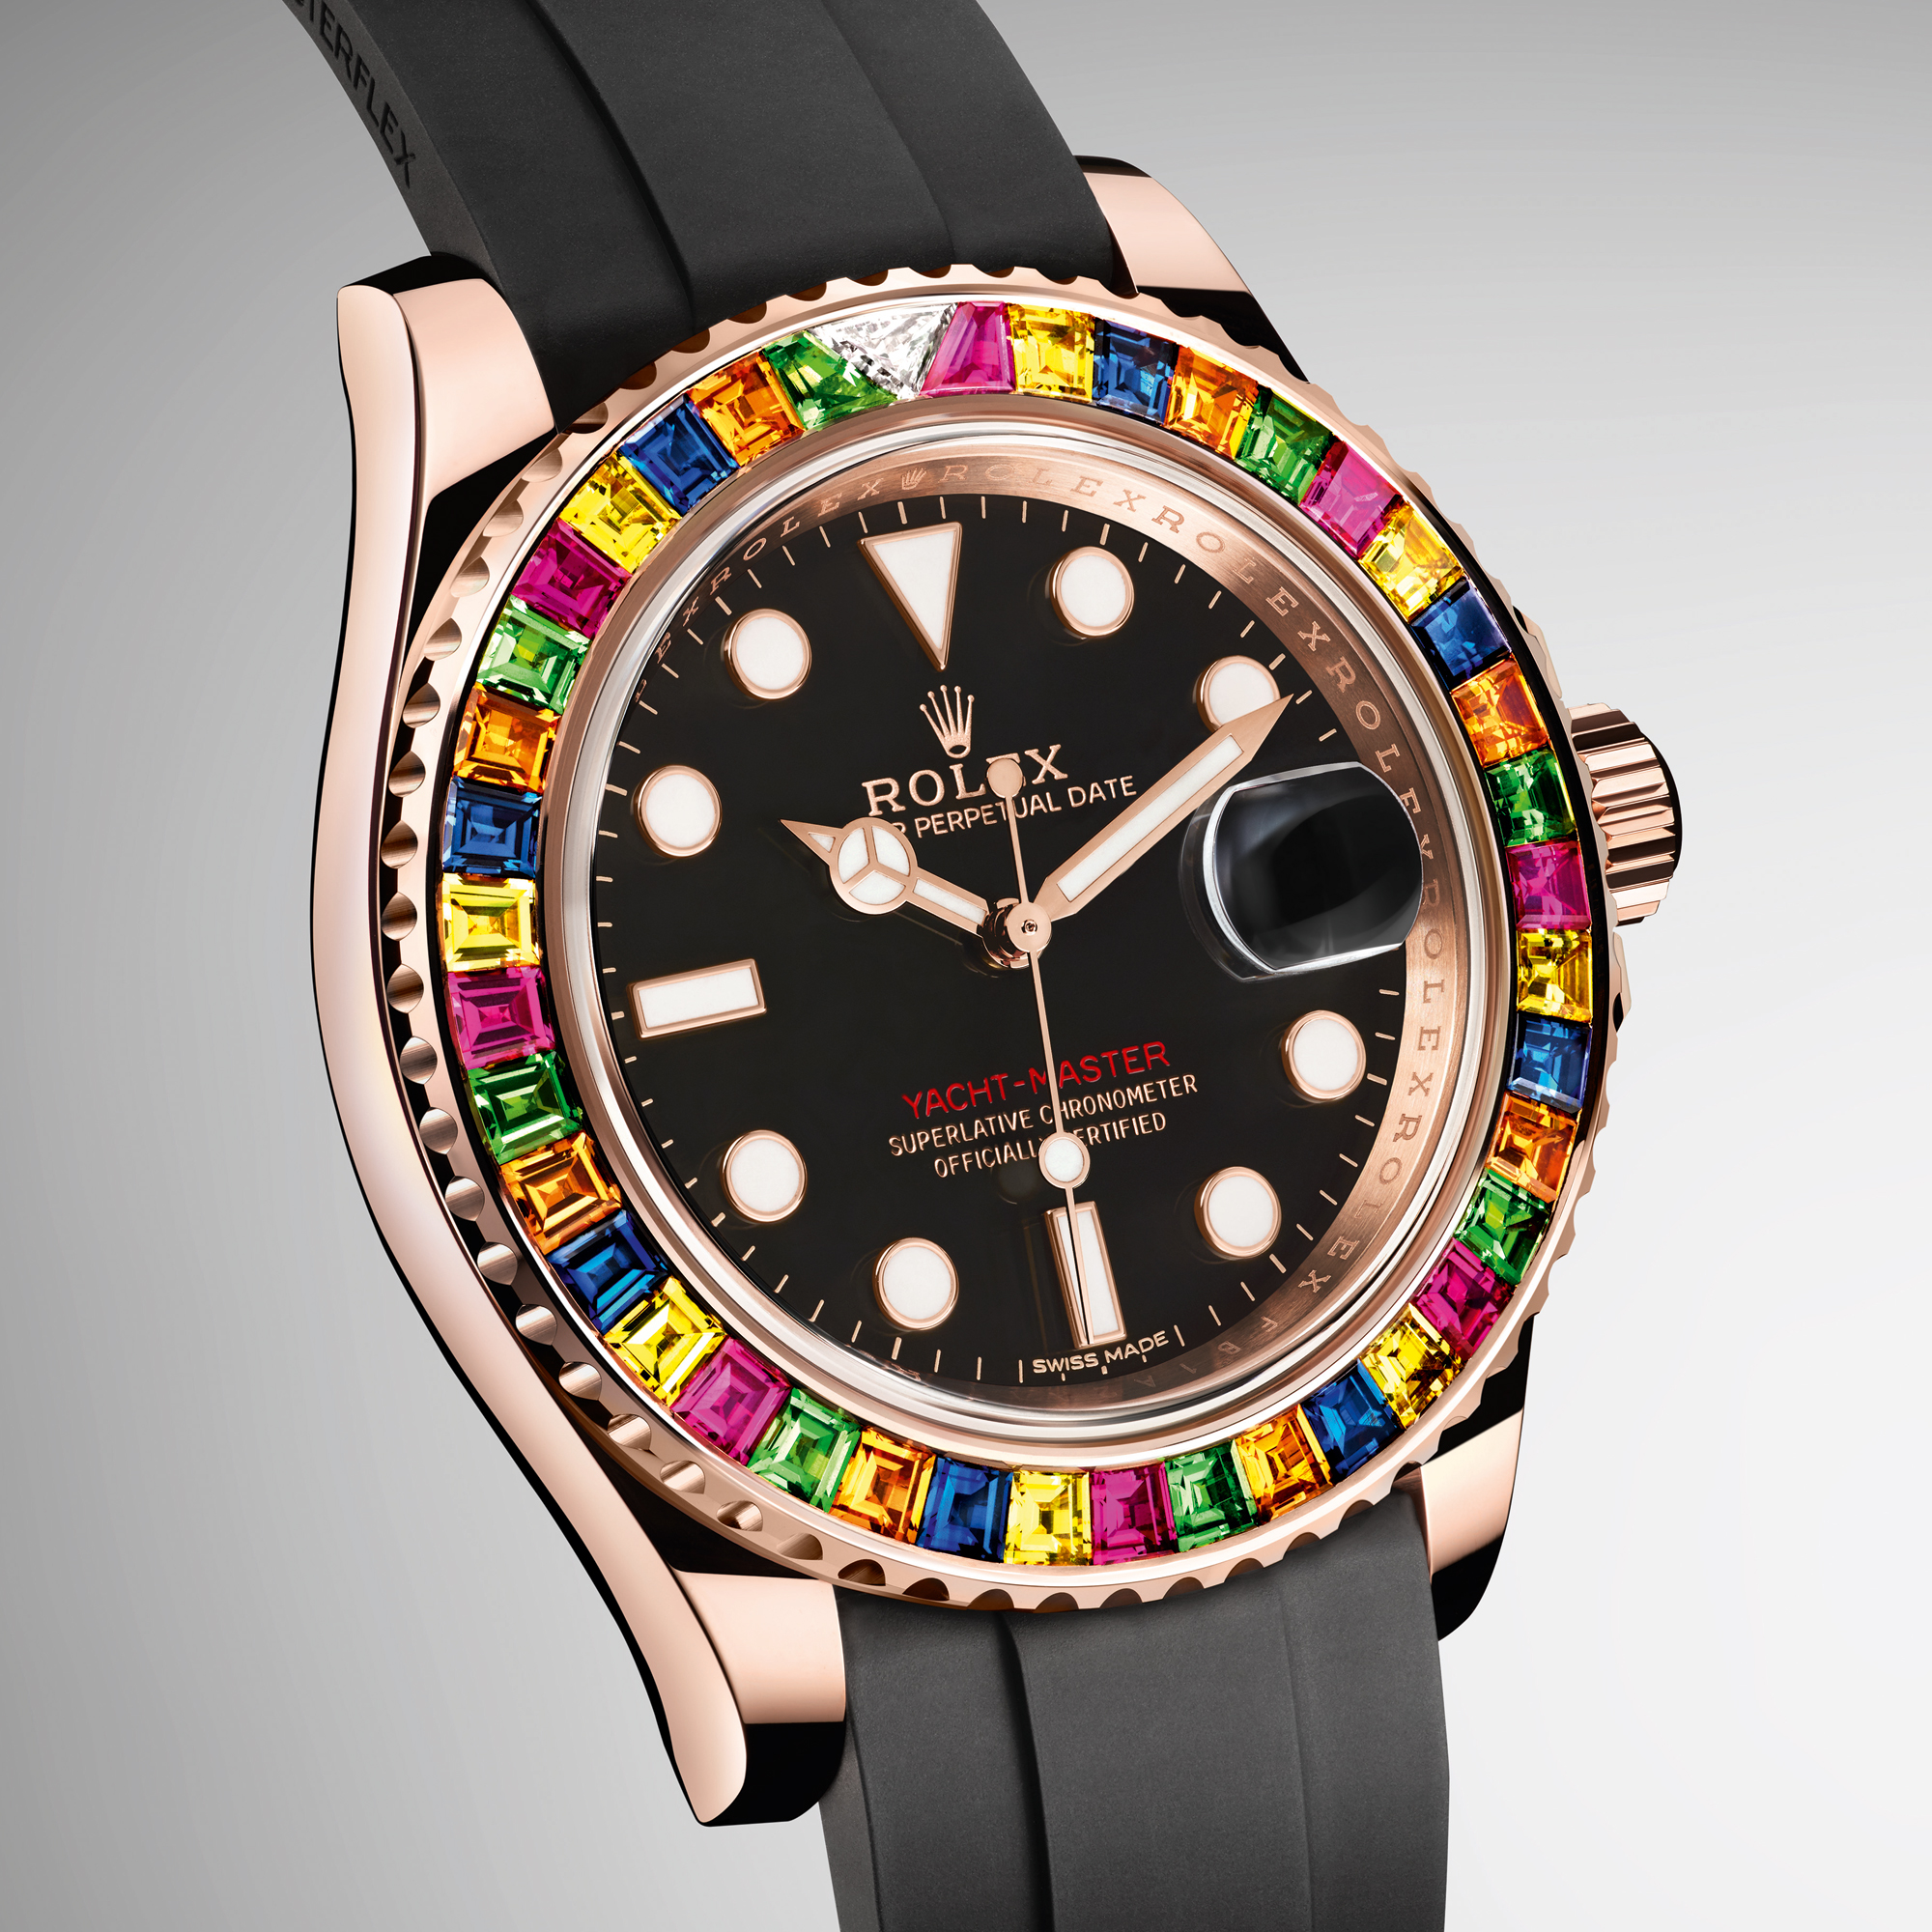 Introducing: The Rolex Yacht-Master 40 